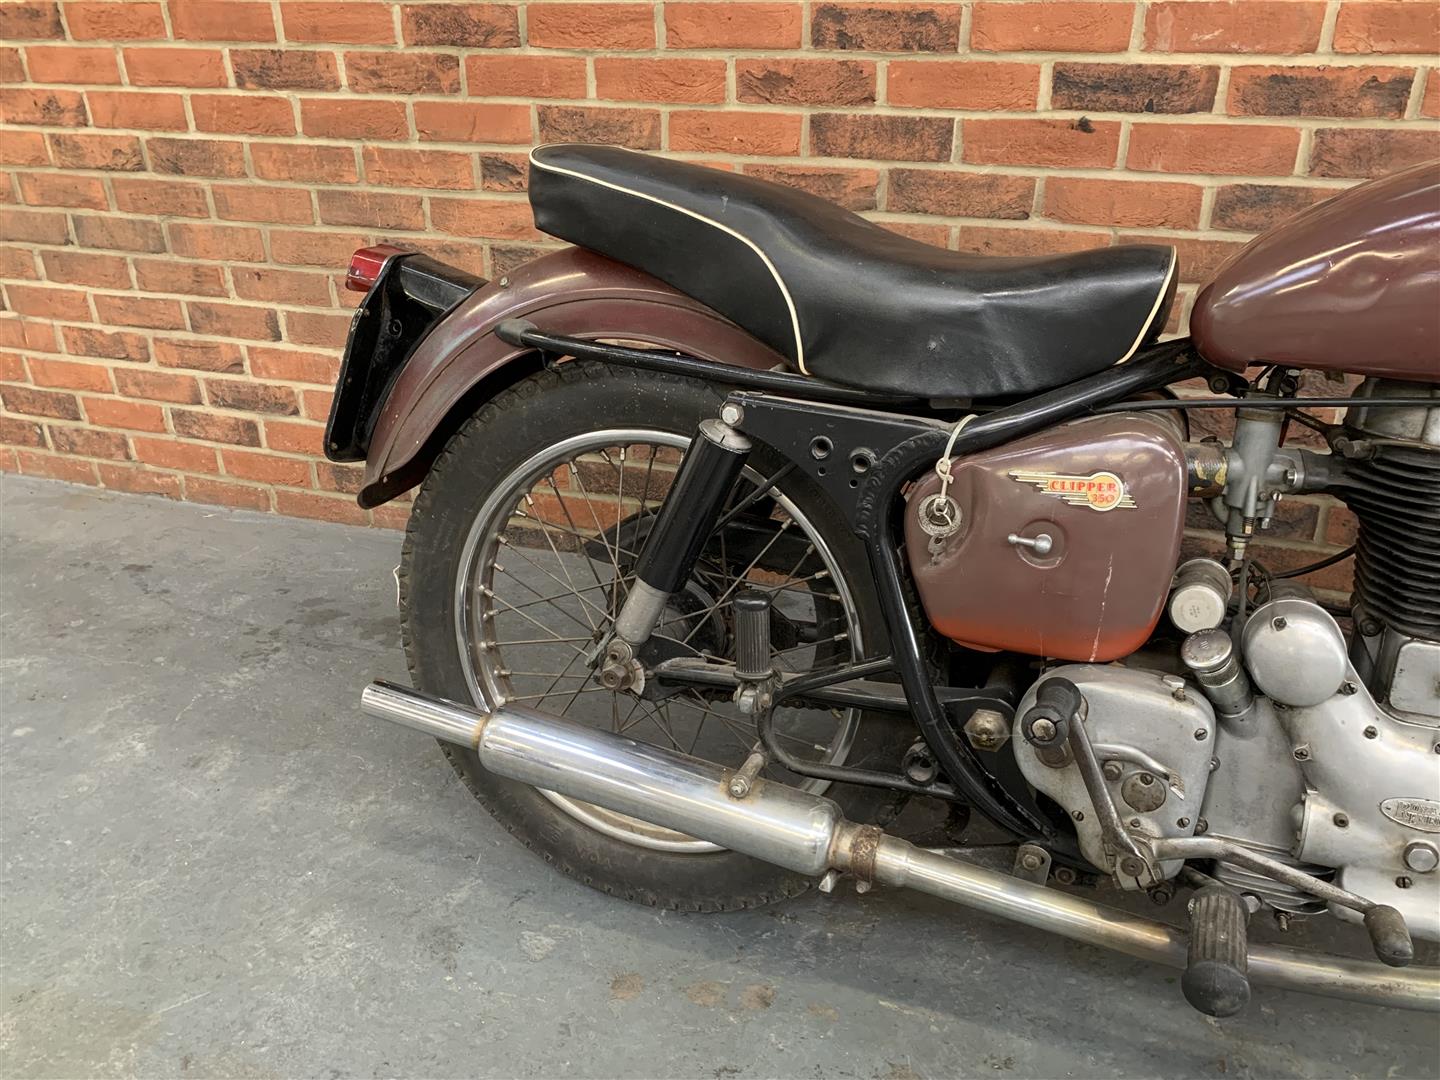 1959 Royal Enfield Clipper 350cc - Image 12 of 16